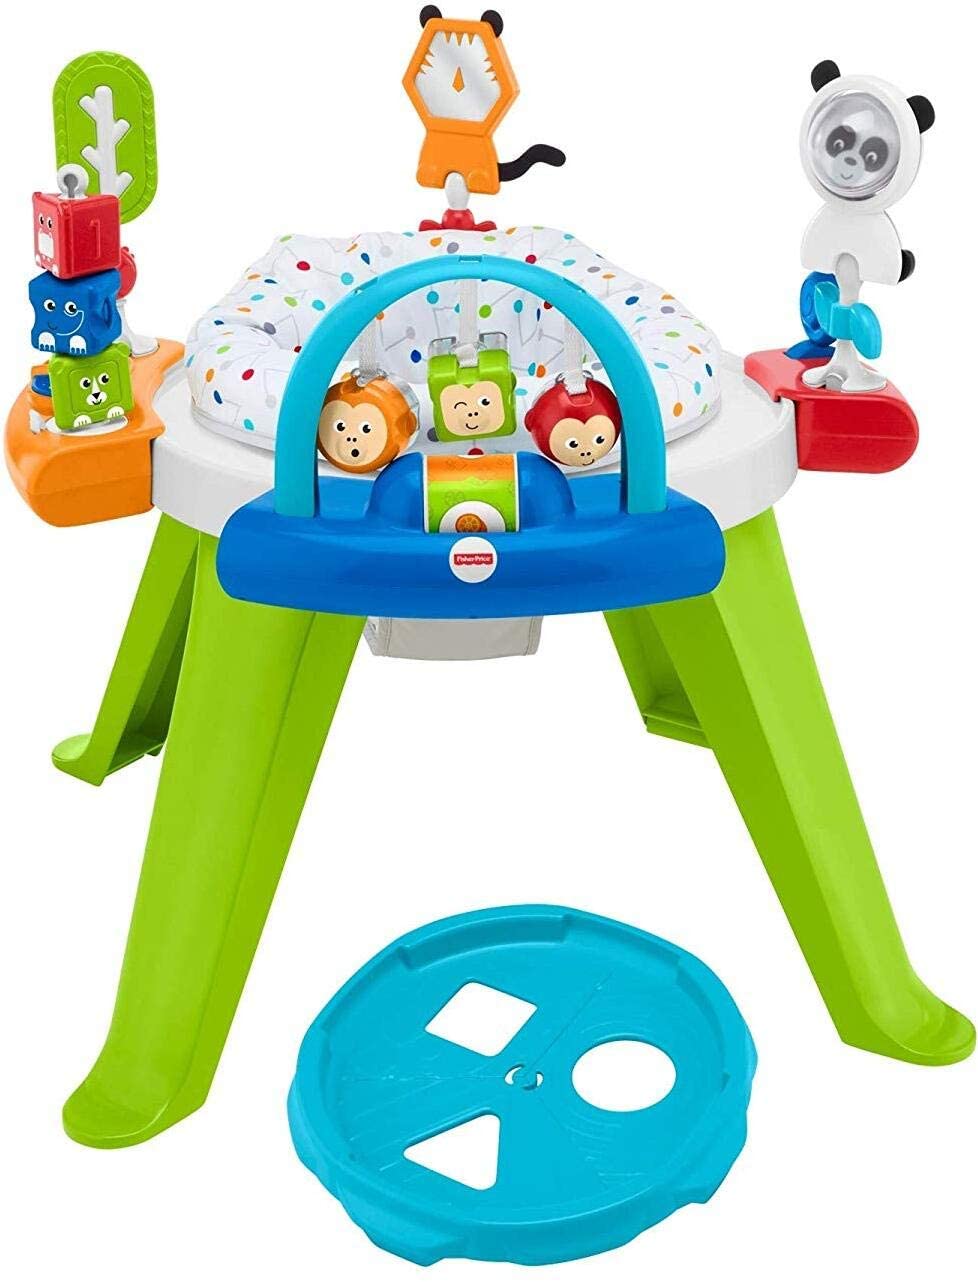 baby-fair Fisher Price 3-In-1 Spin & Sort Activity Center